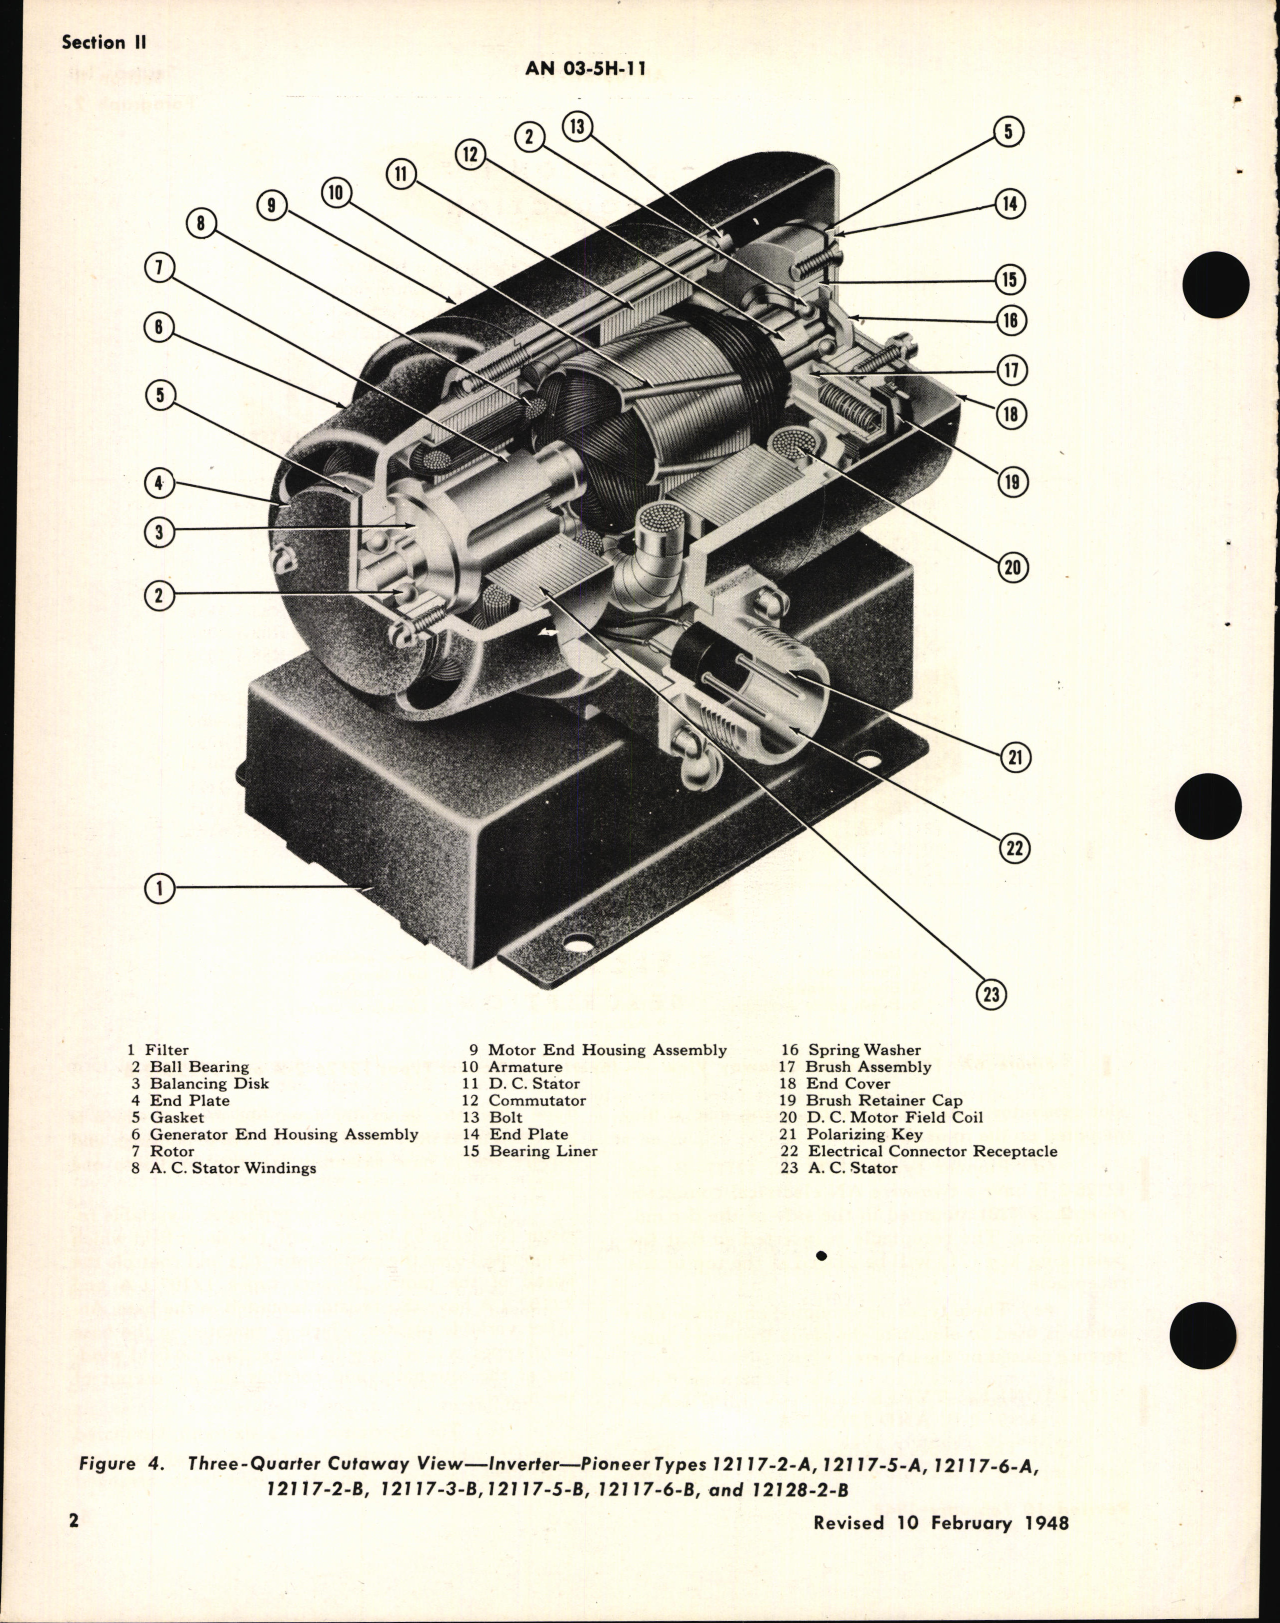 Sample page 8 from AirCorps Library document: Operation, Service & Overhaul Instructions with Parts Catalog for Pioneer Inverters